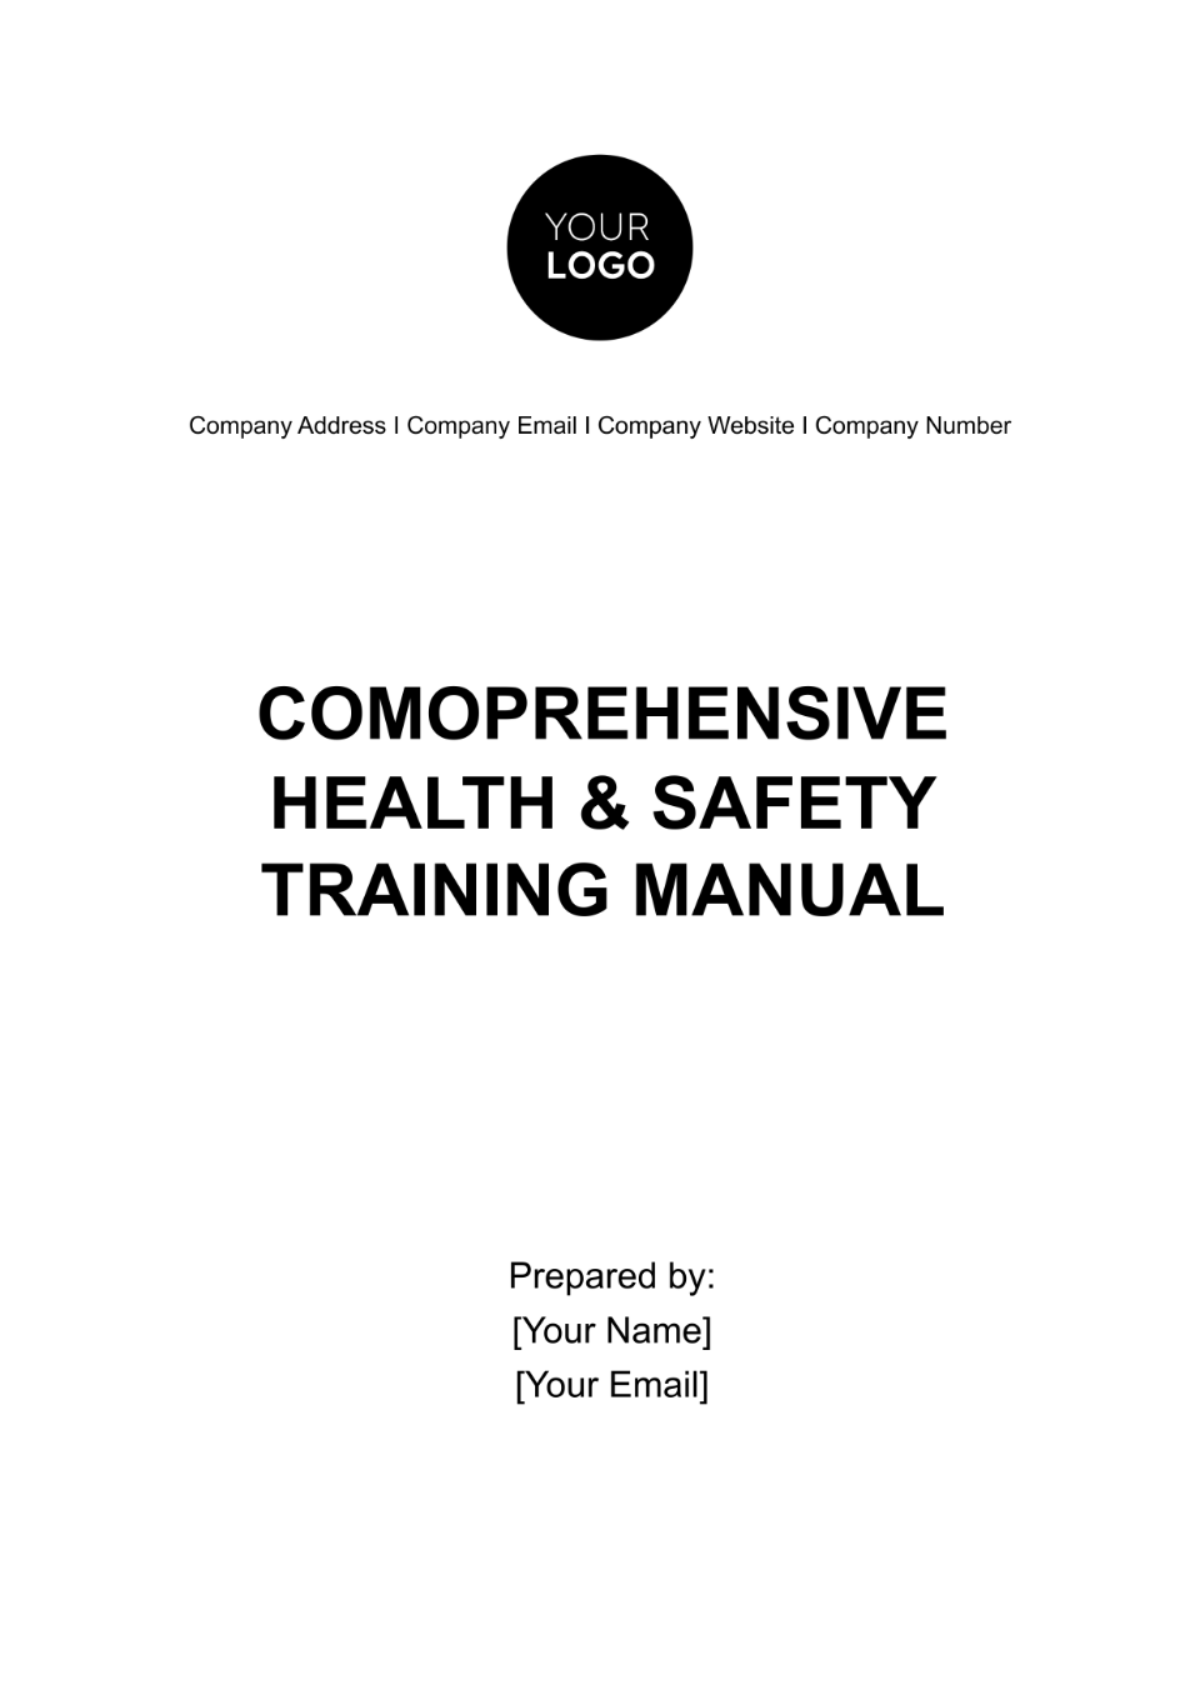 Comprehensive Health & Safety Training Manual Template